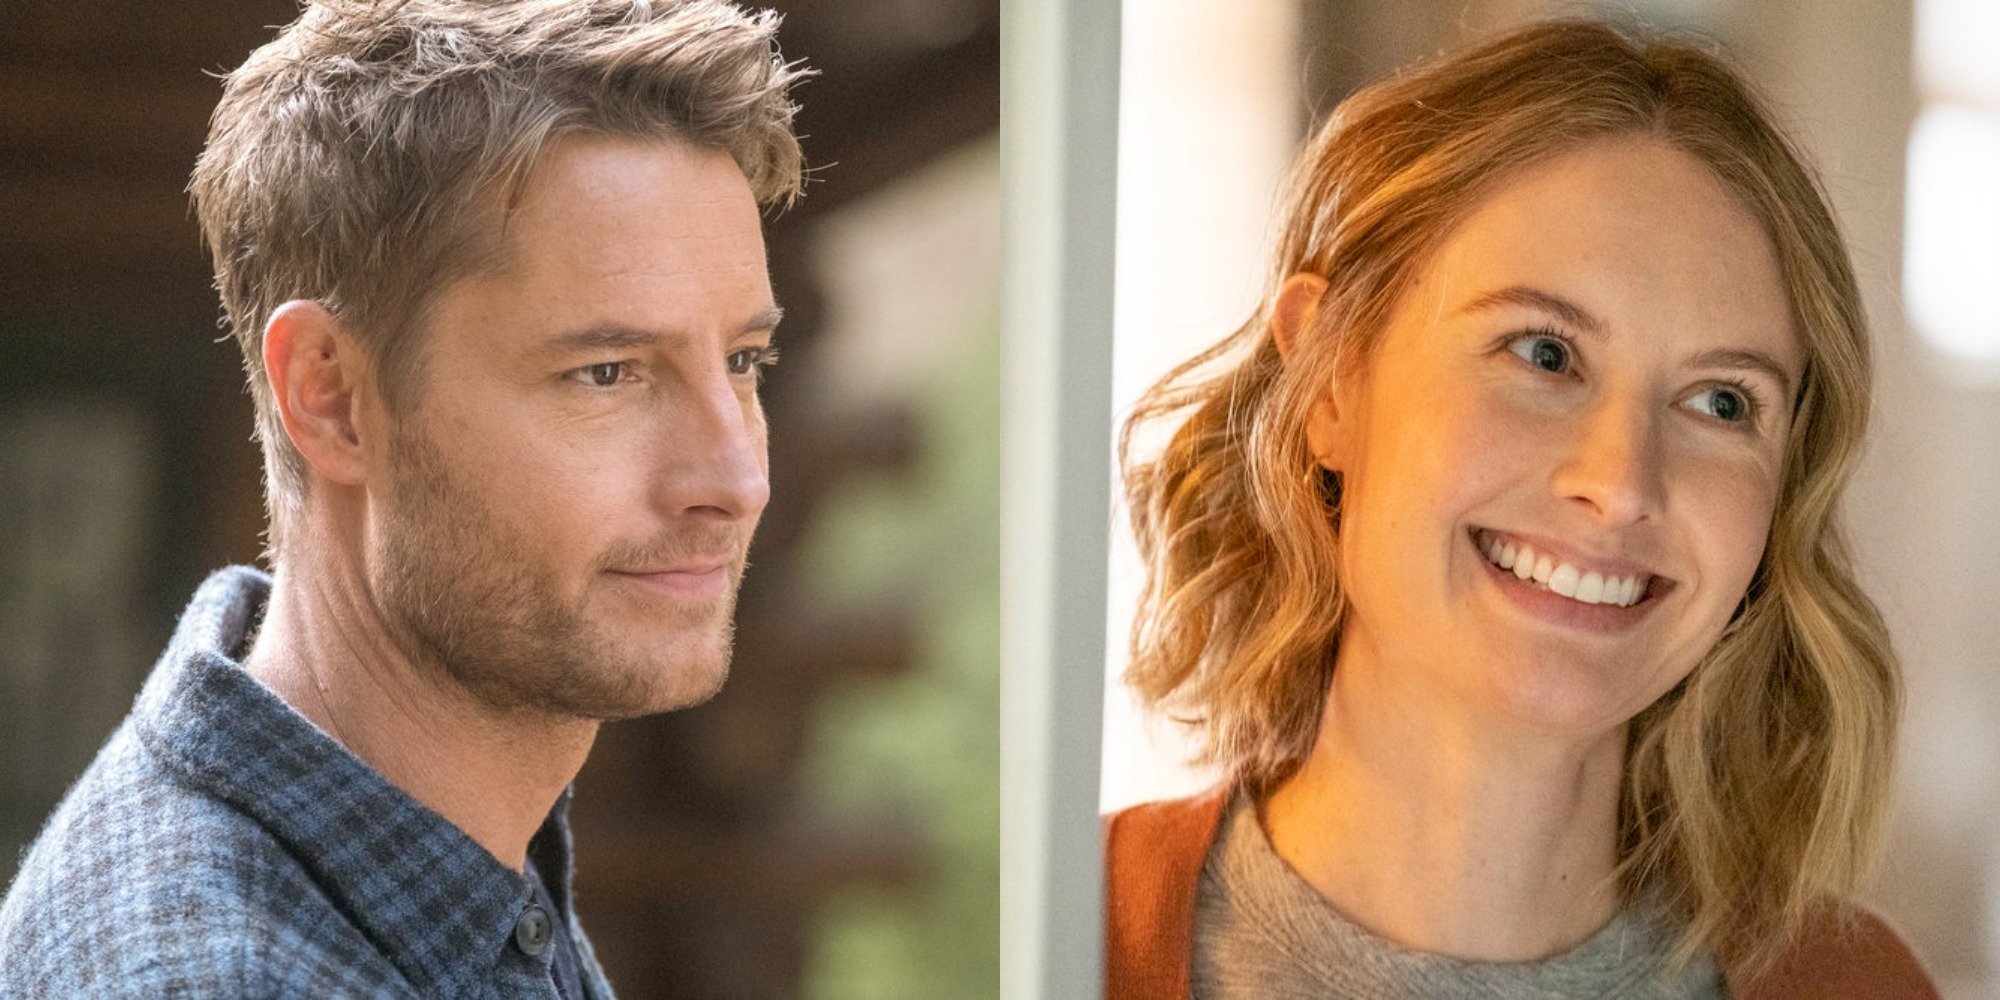 Justin Hartley and Caitlin Thompson on the set of This Is Us.